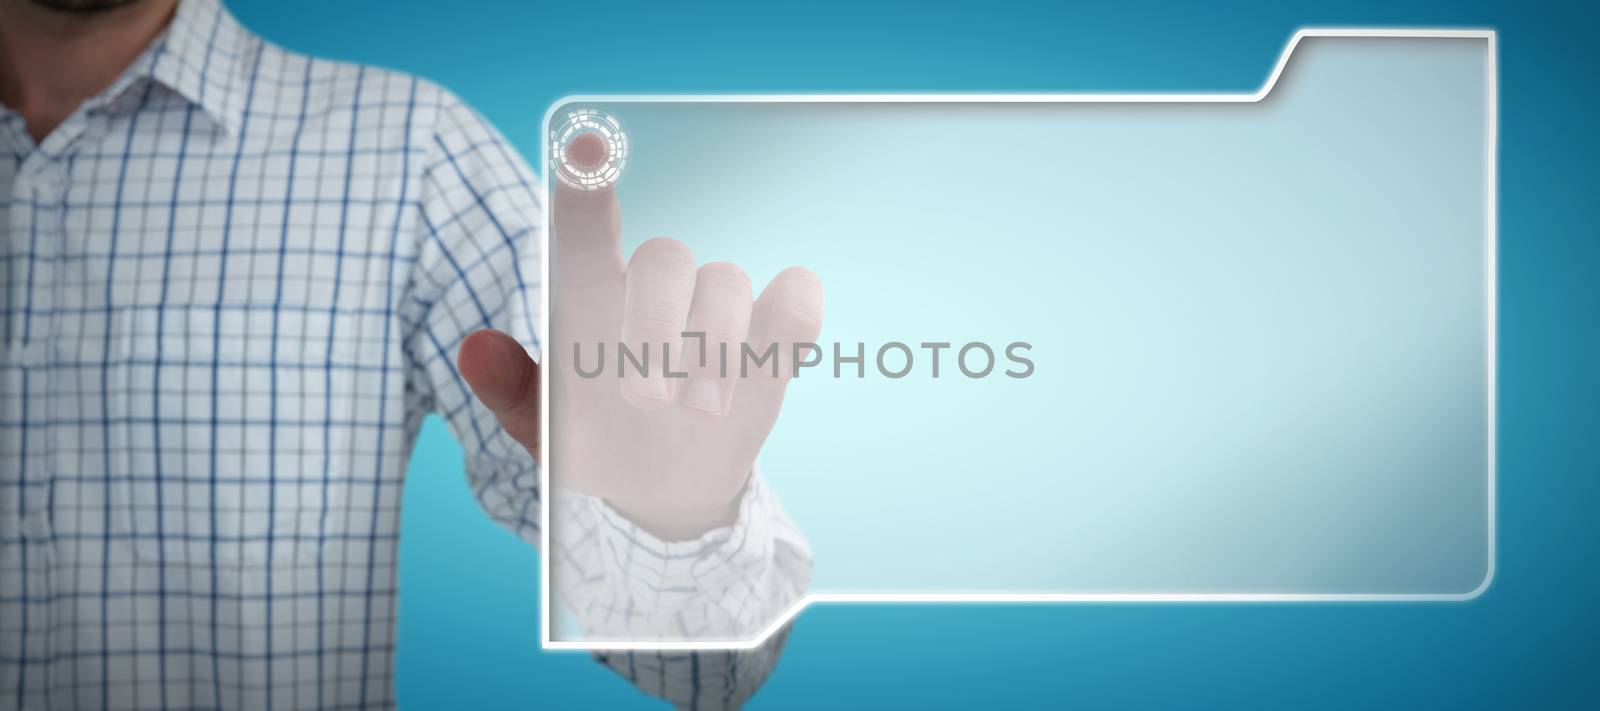 Man pretending to touch an invisible screen against white background against abstract blue background